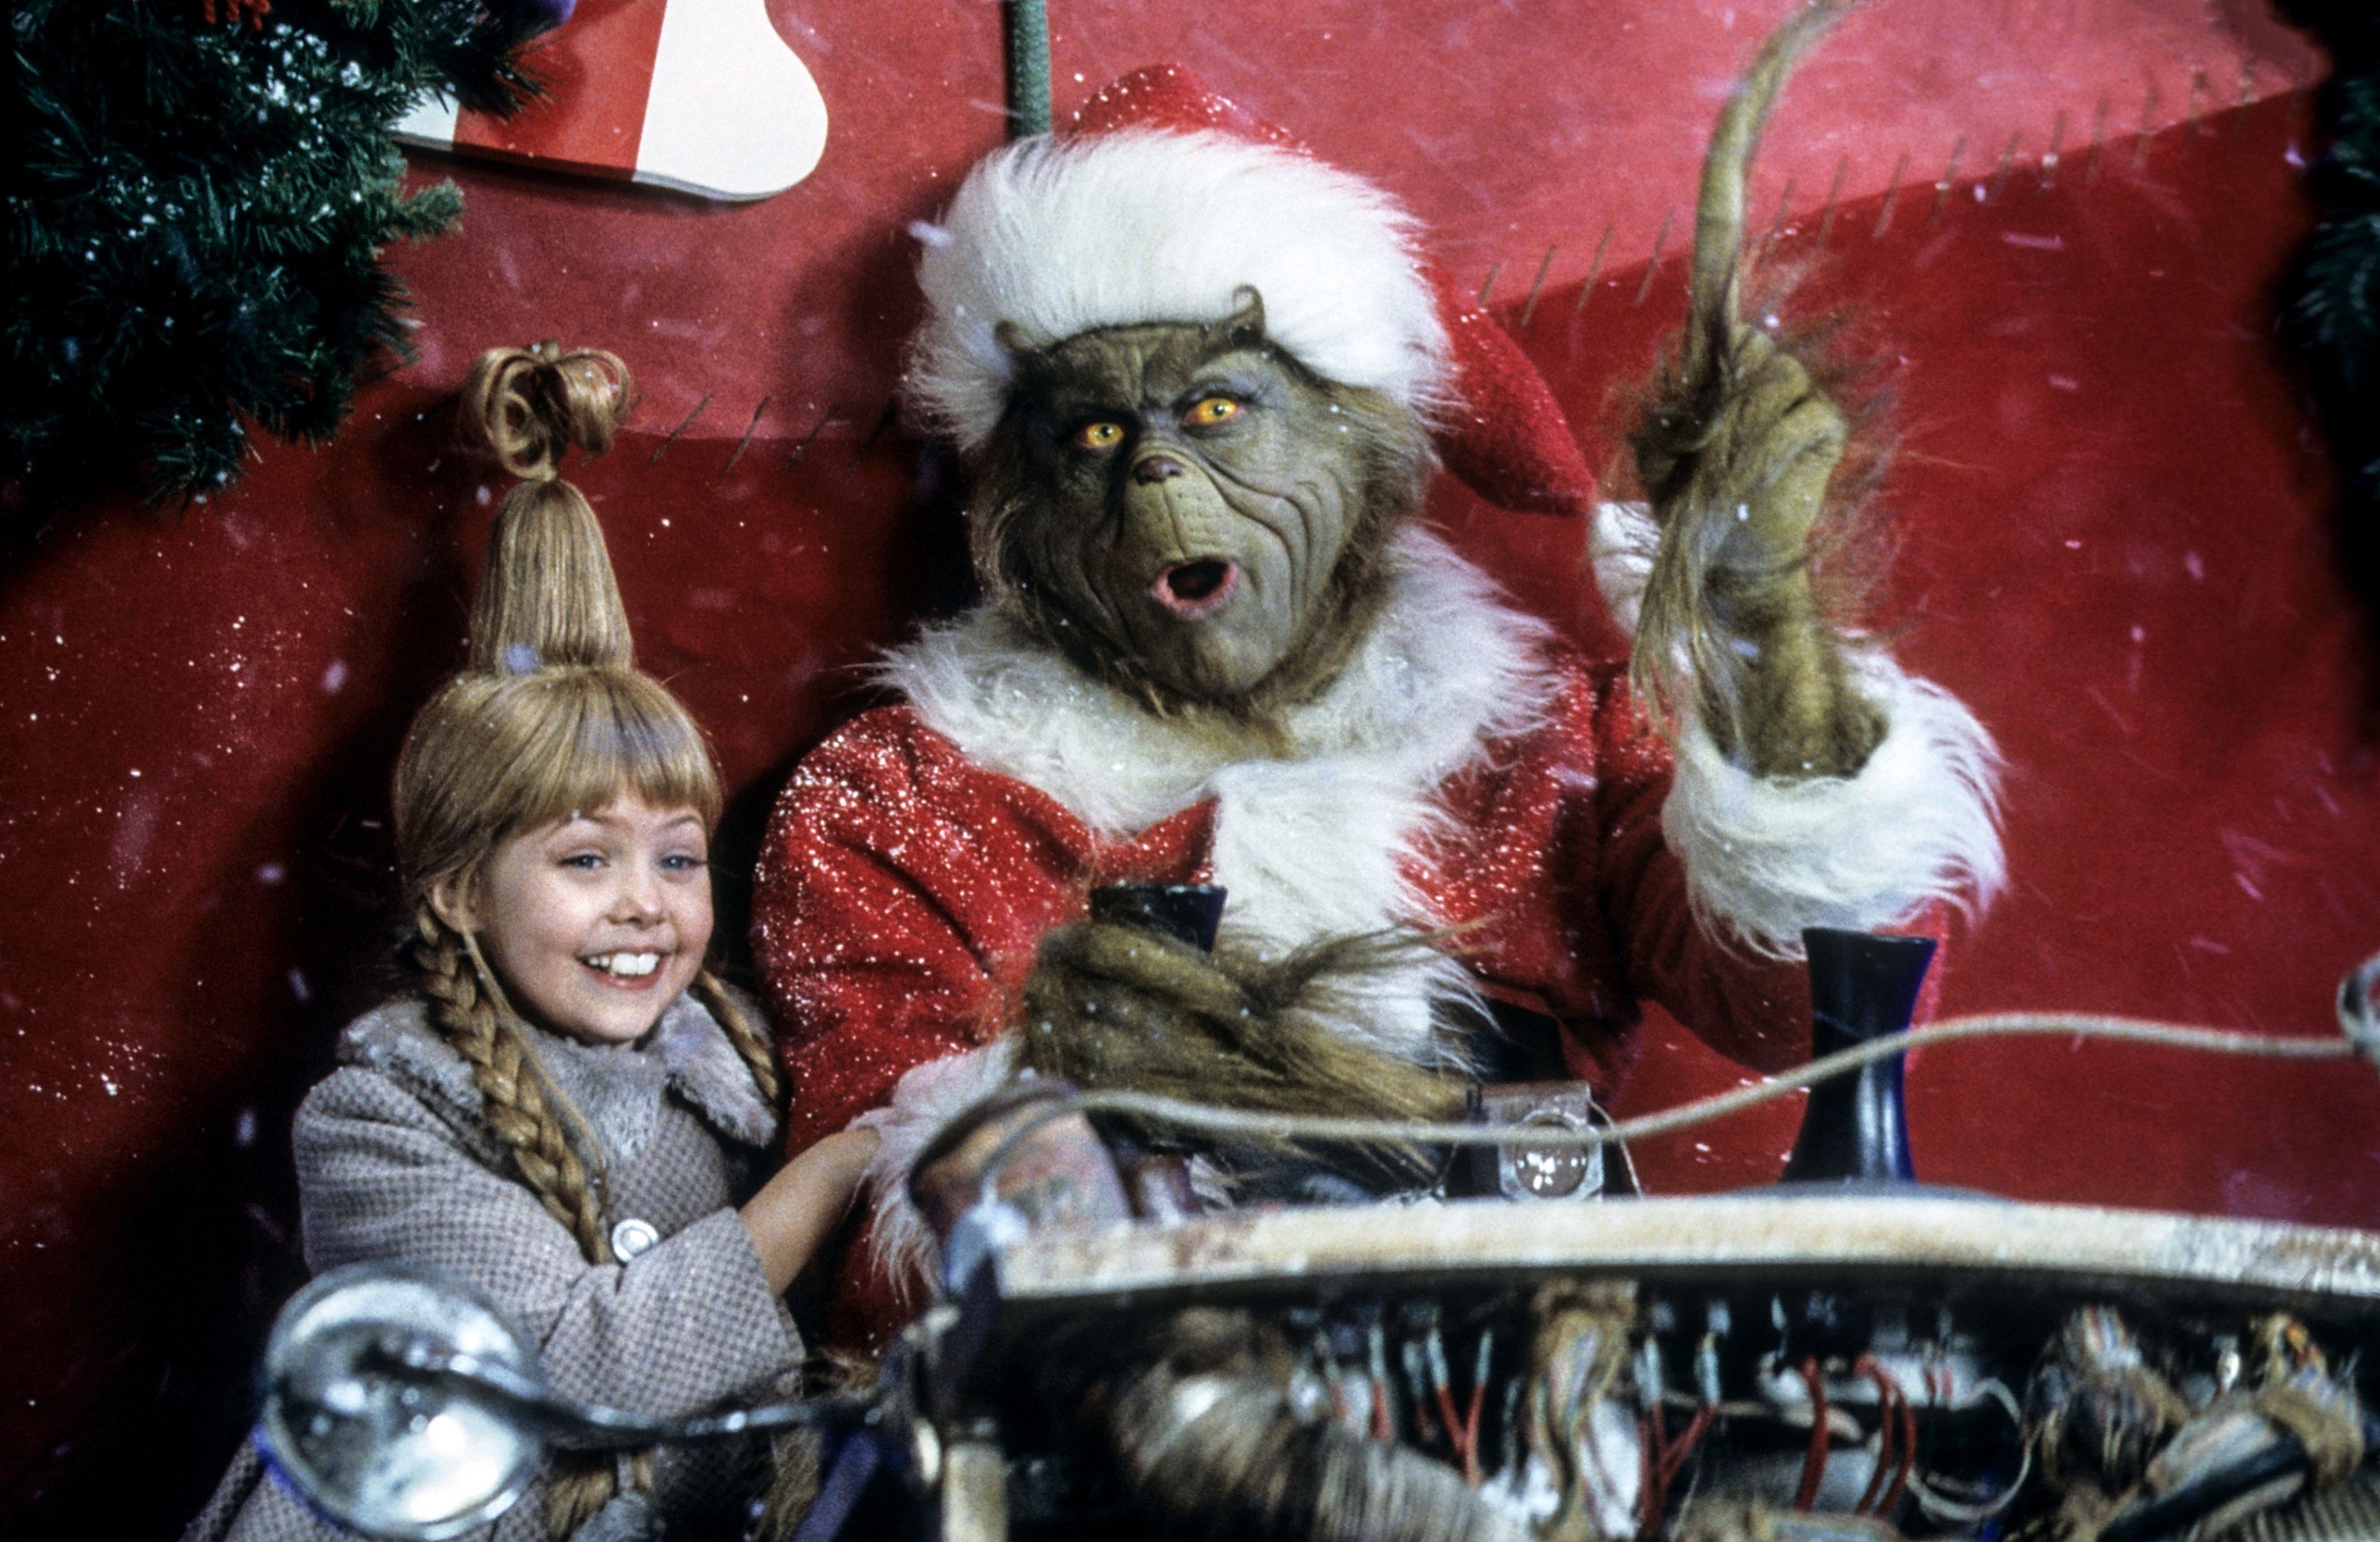 Taylor smiling with the Grinch